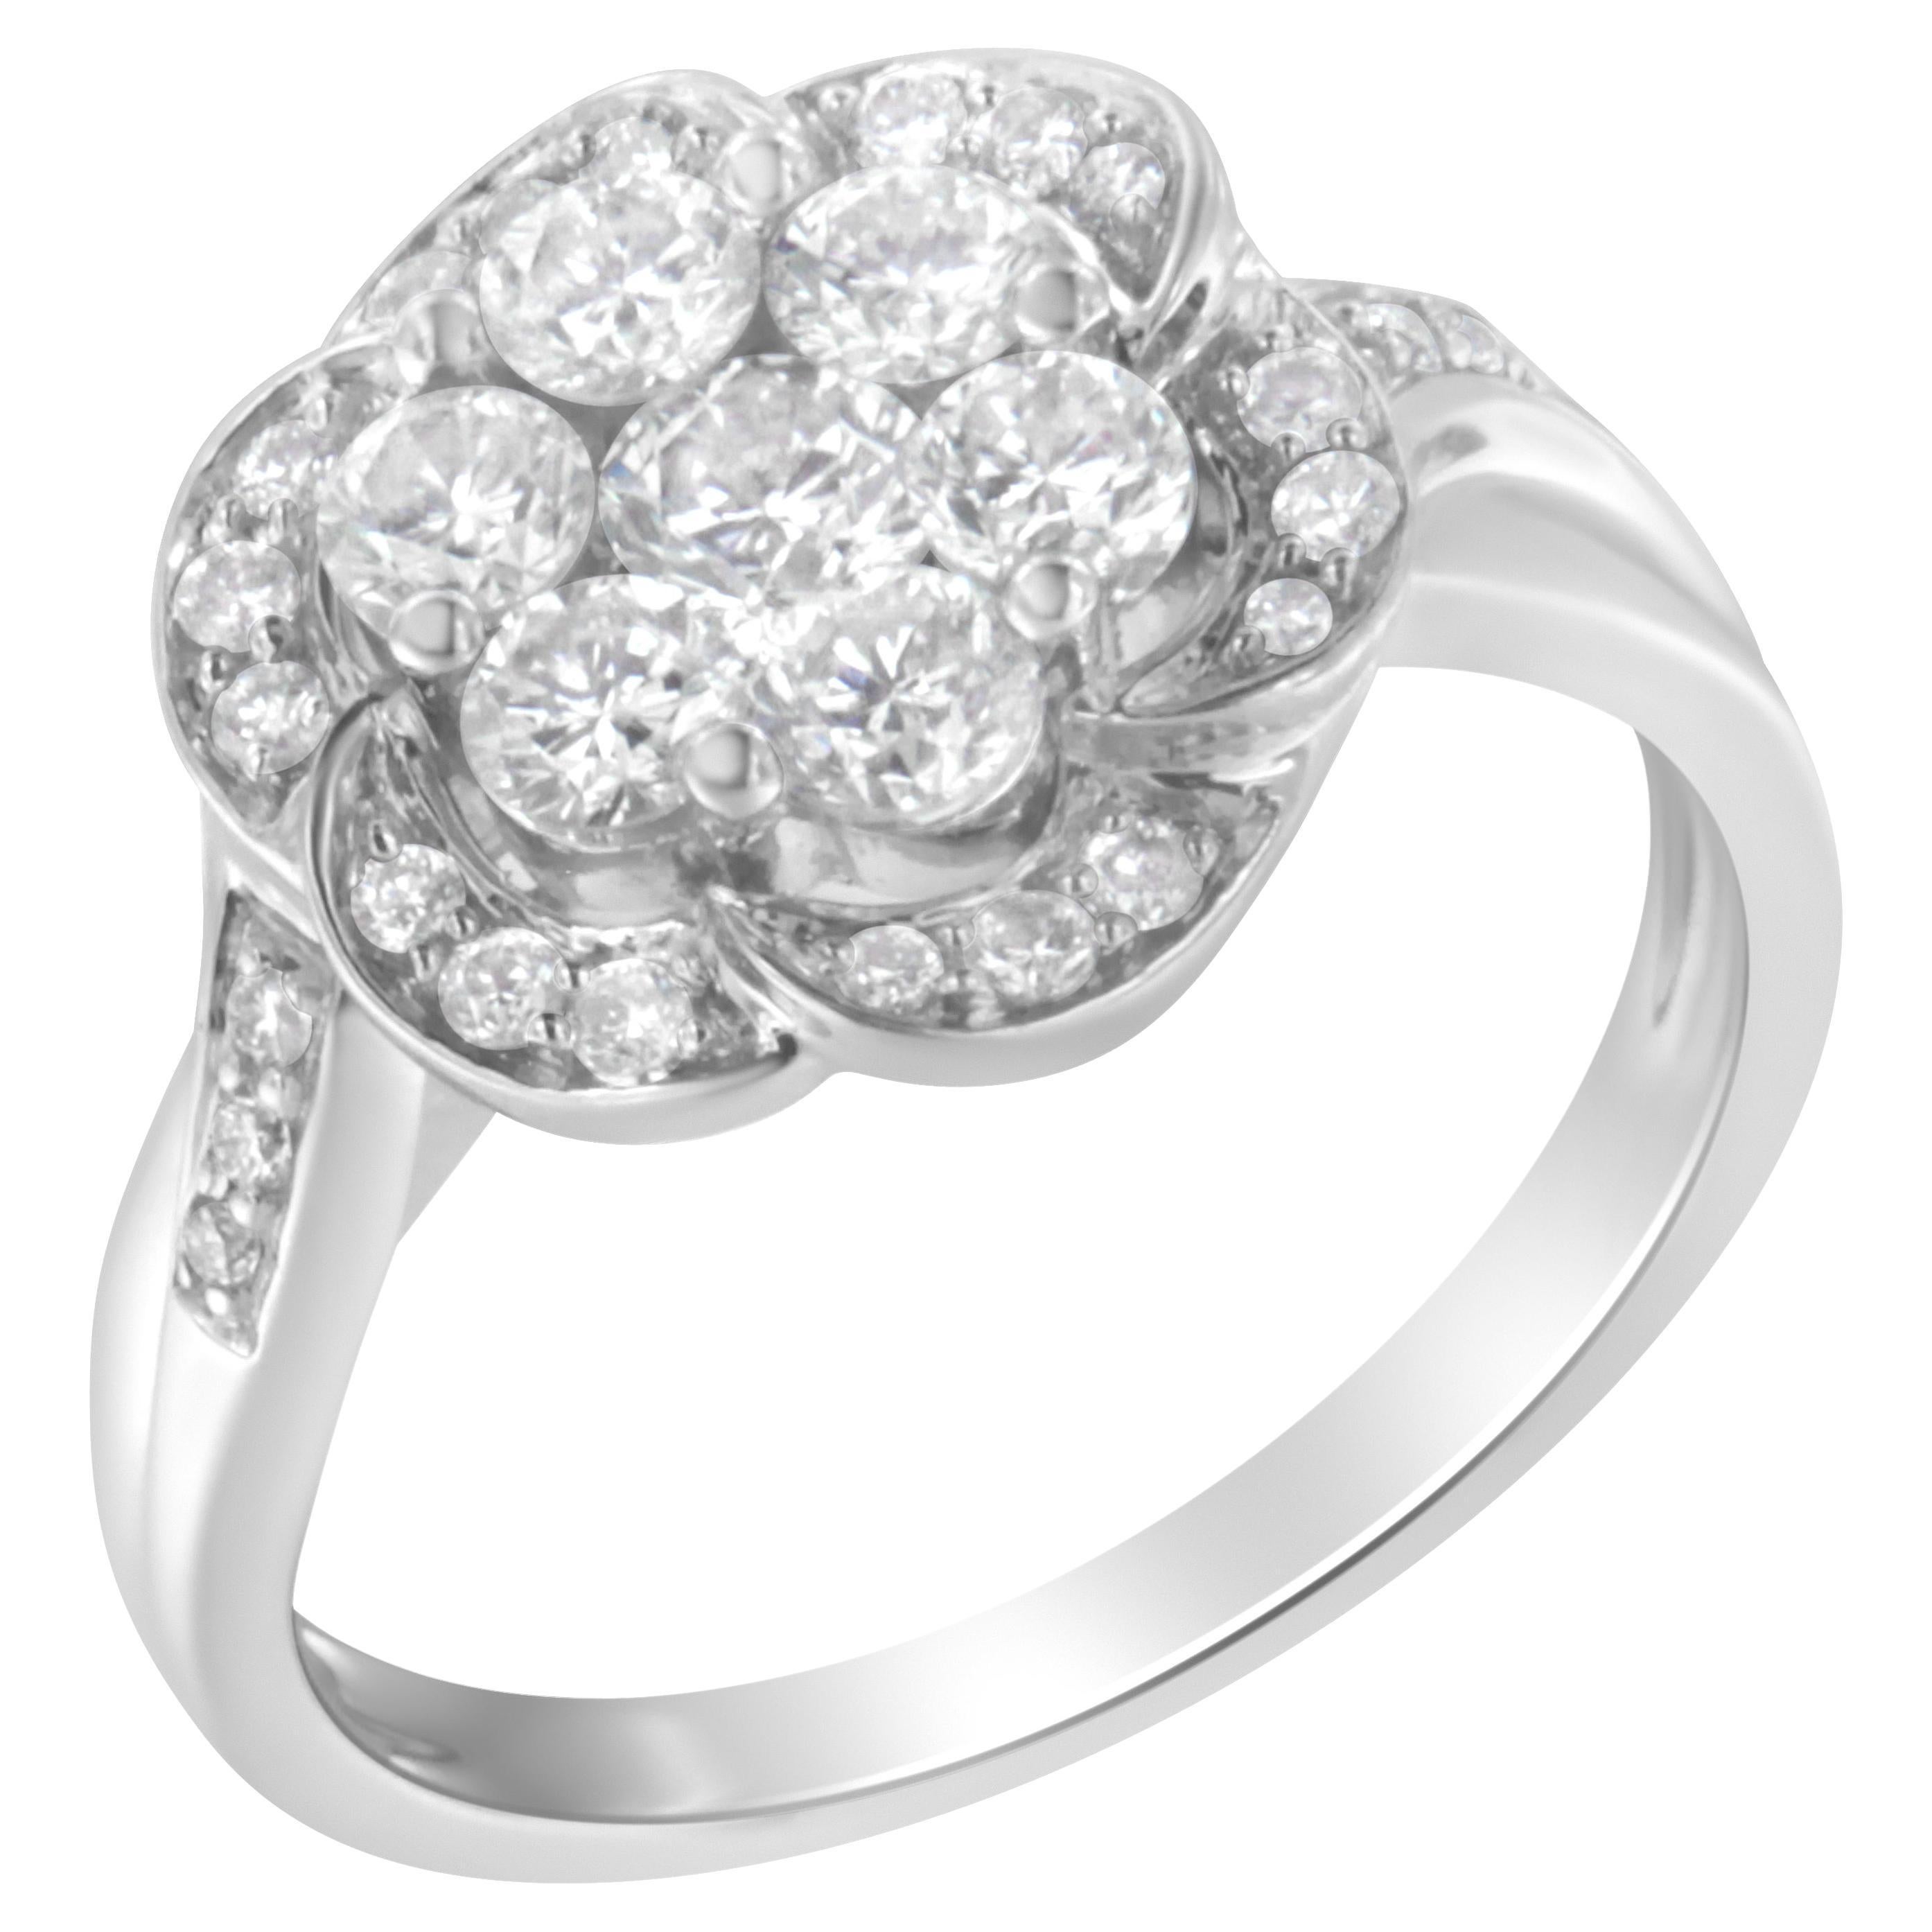 For Sale:  14K White Gold 1.00 Carat Floral Cluster Diamond Ring